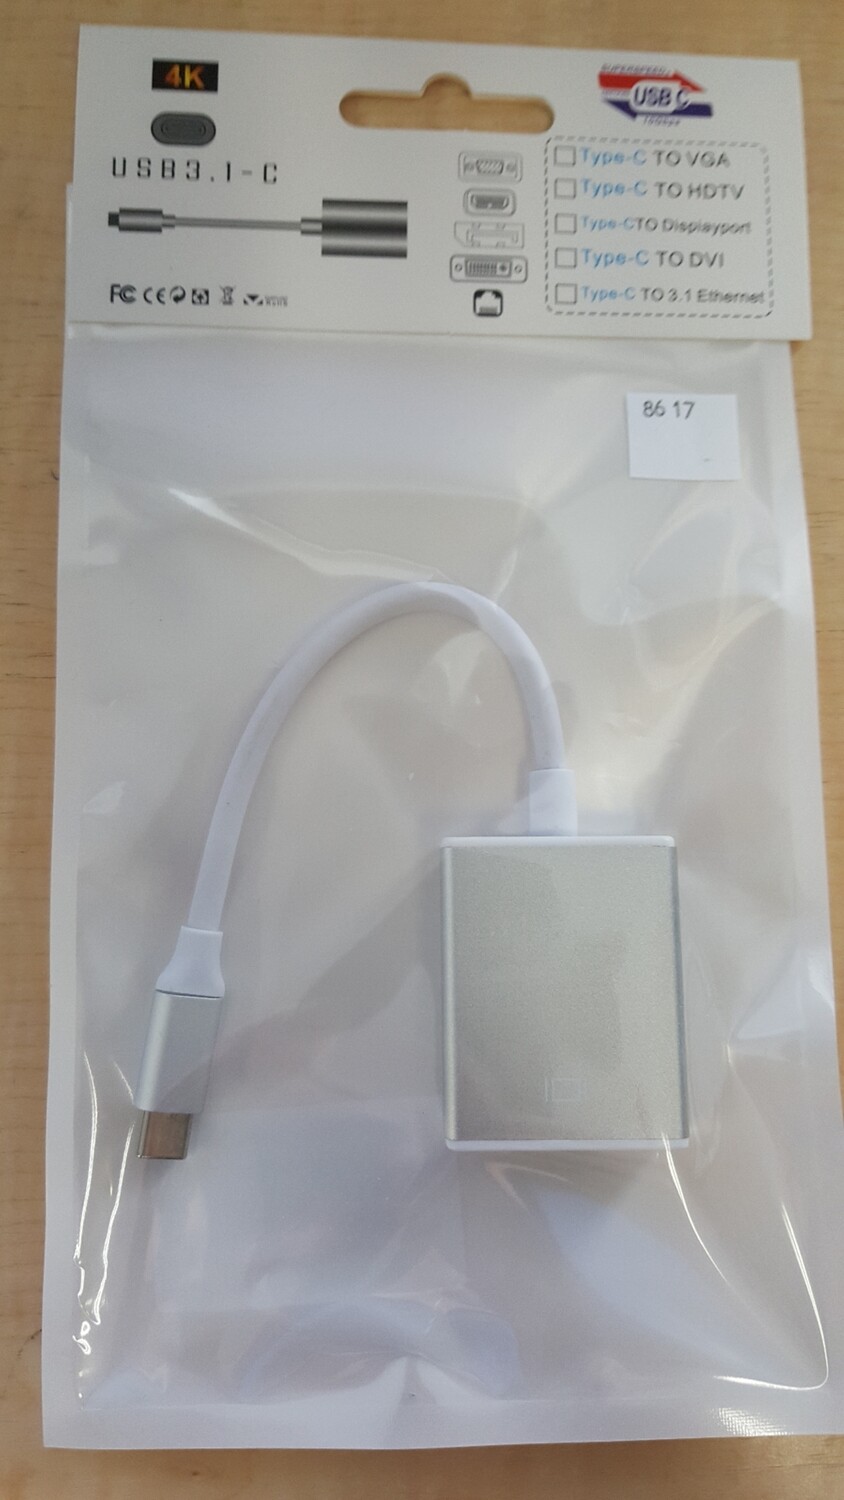 Usb C 3.1 to Hdmi Female Adapter